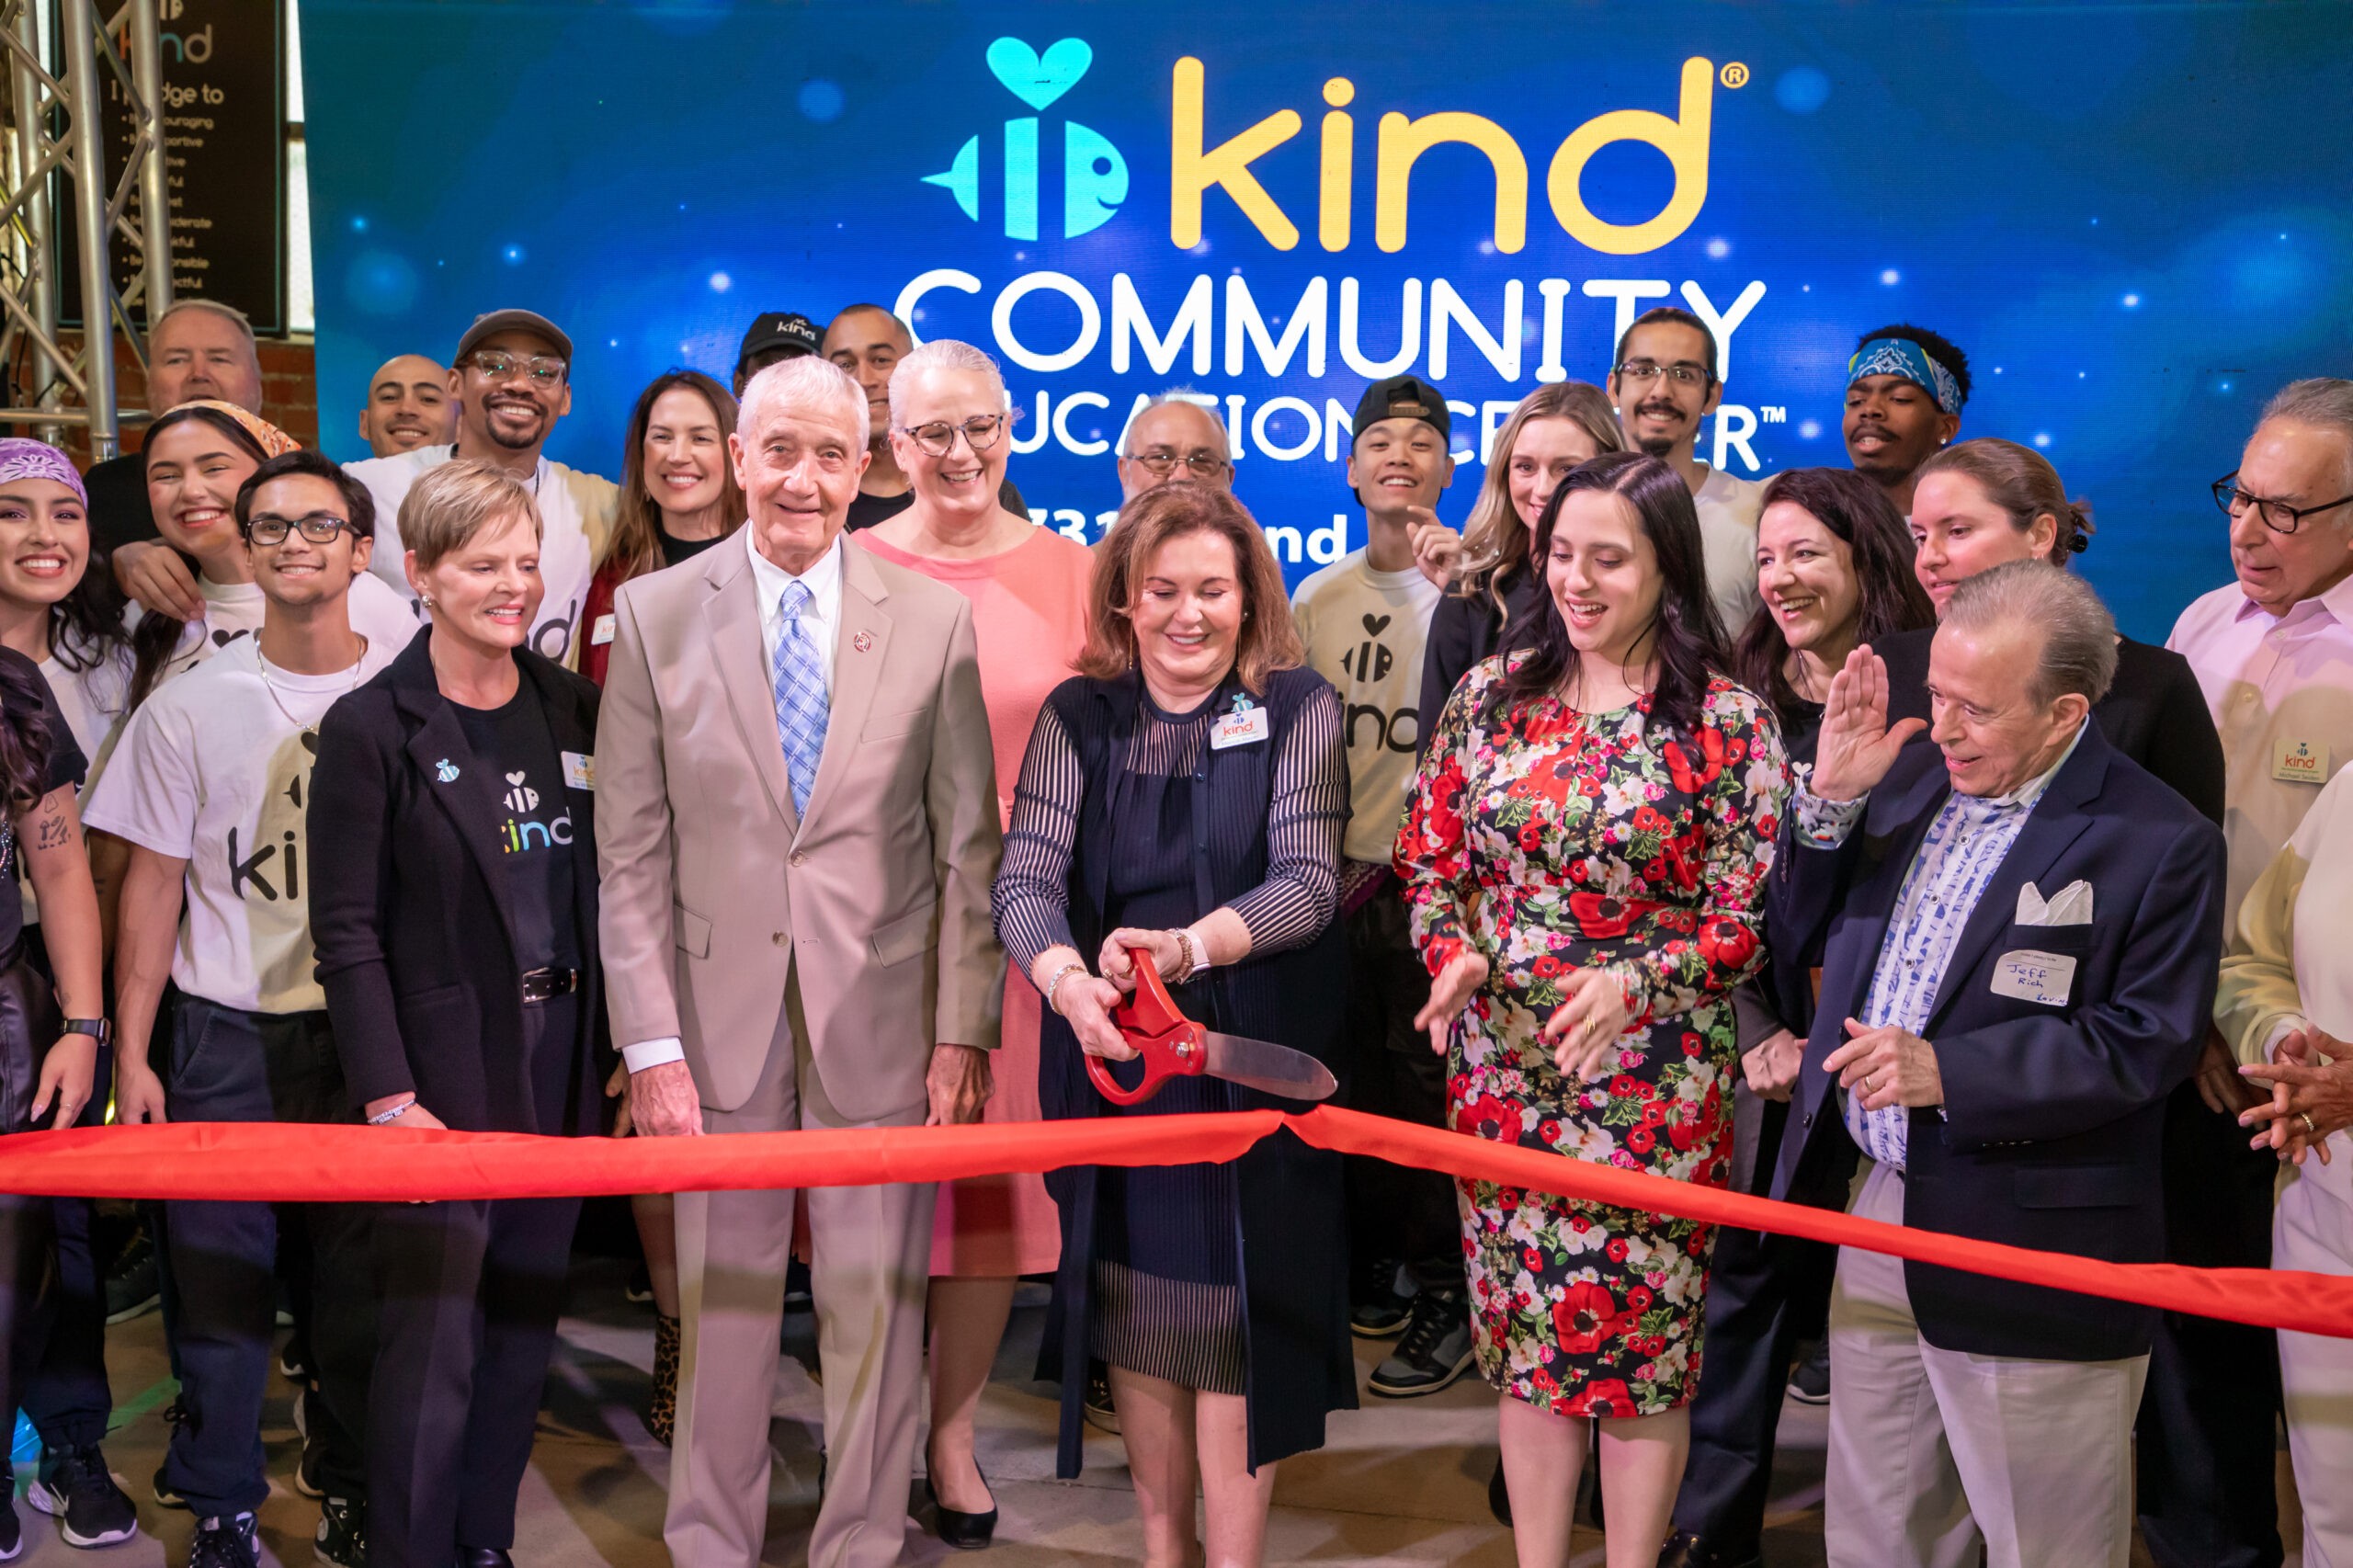 A Ribbon Cutting at the BE KIND Community Education Center